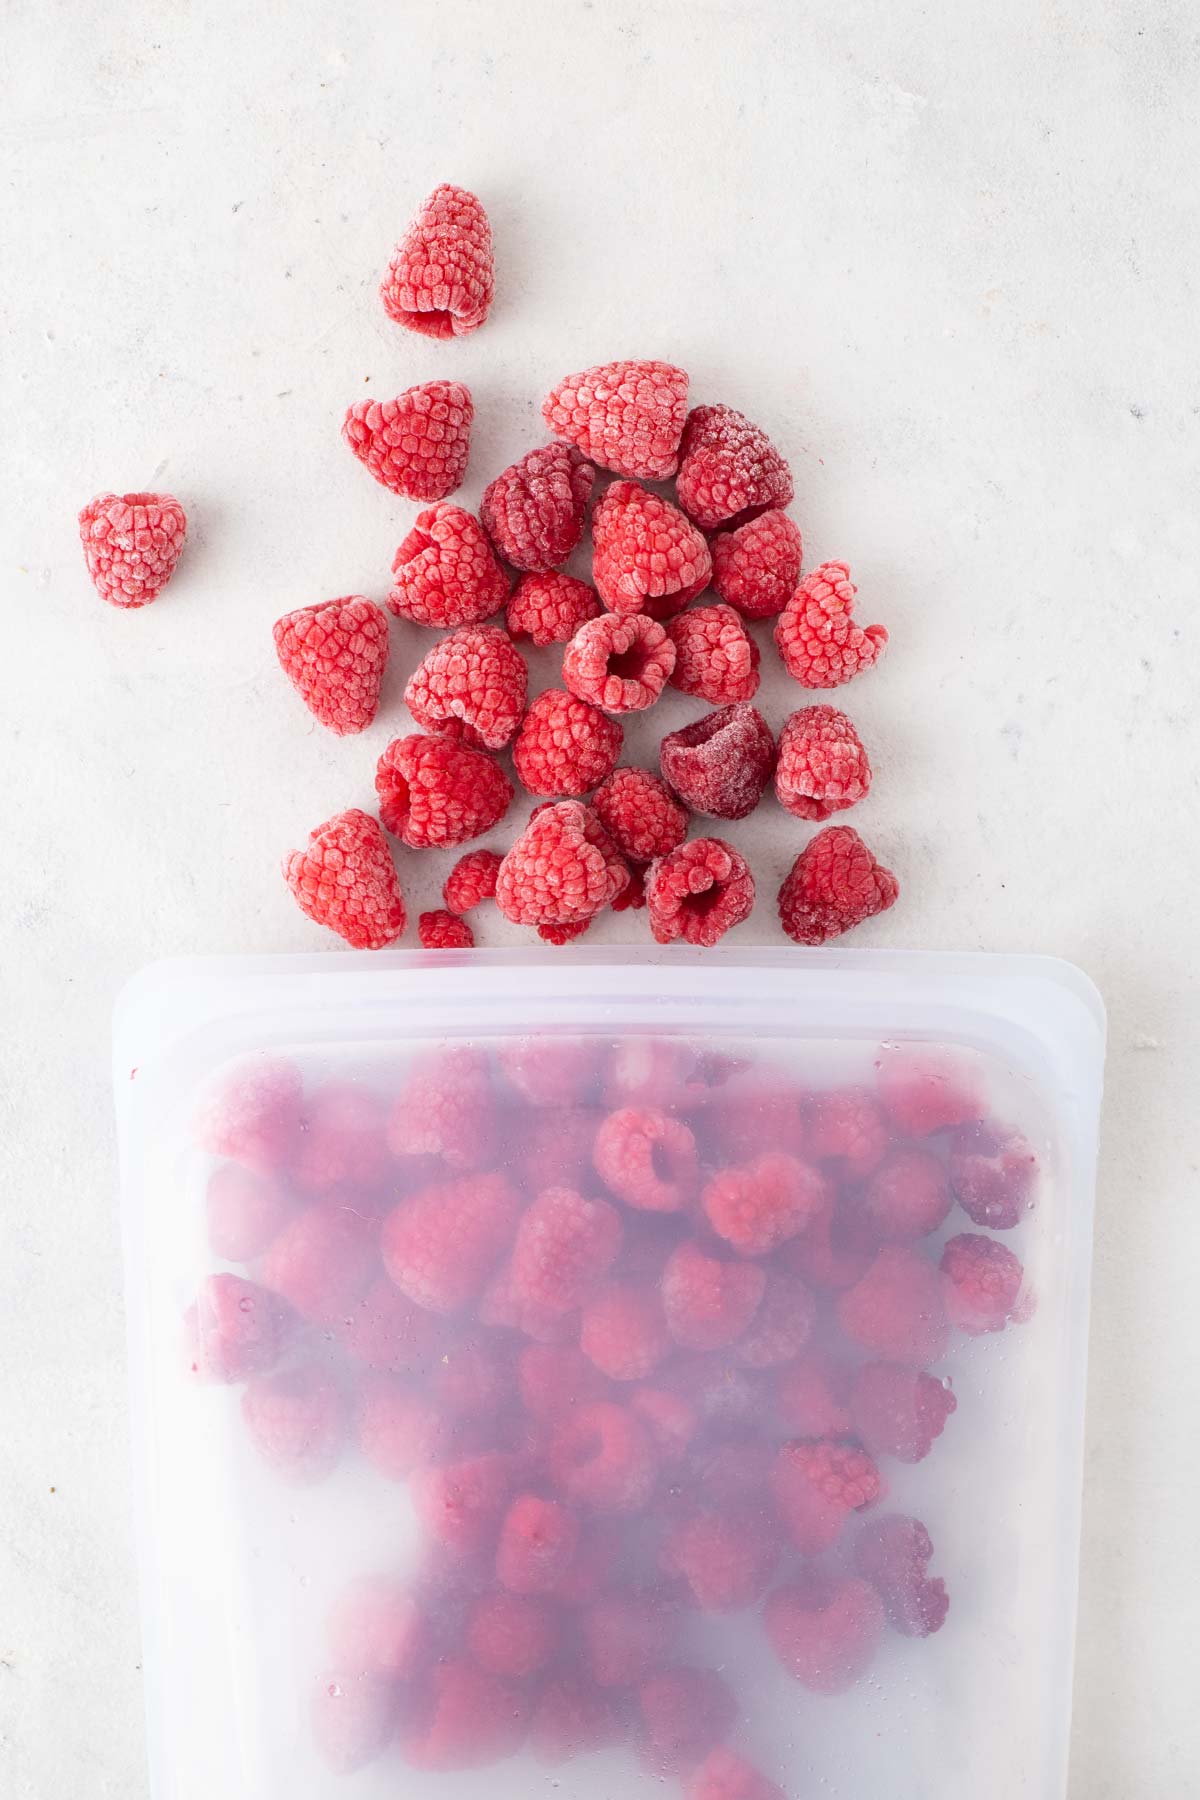 Frozen raspberries in a silicone bag.